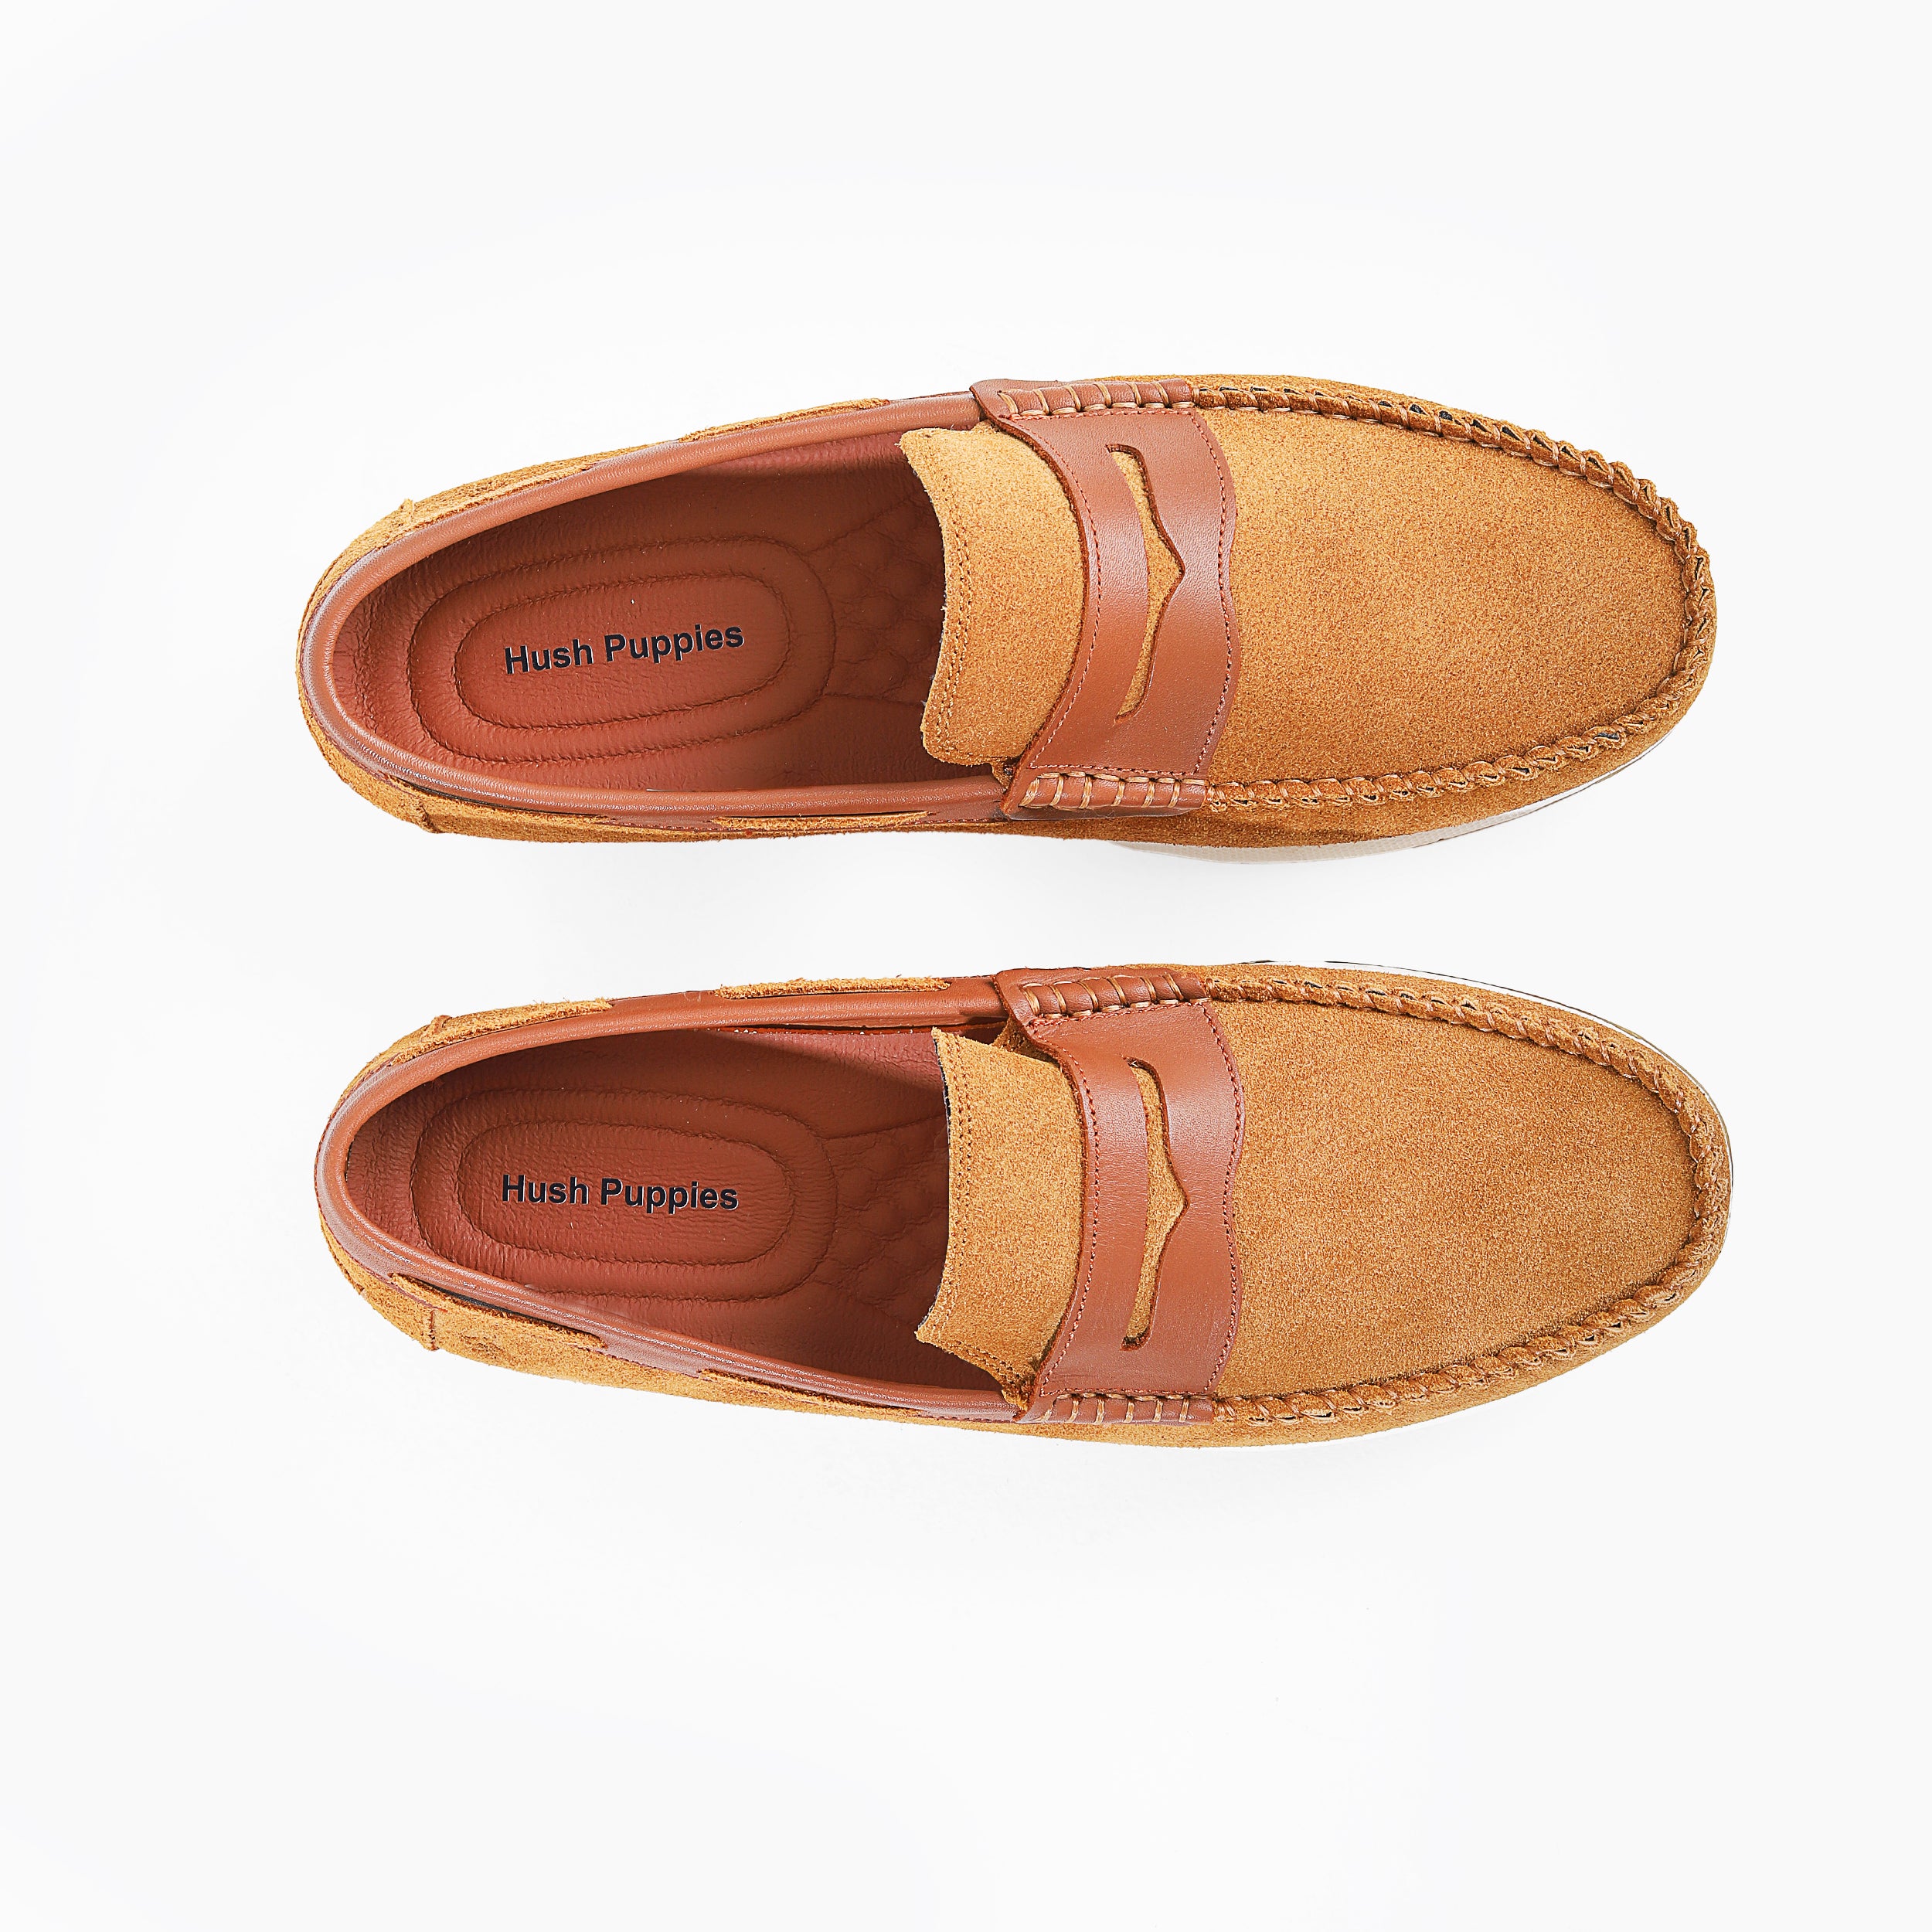 Hush Puppies Suede Loafers Shoes 506